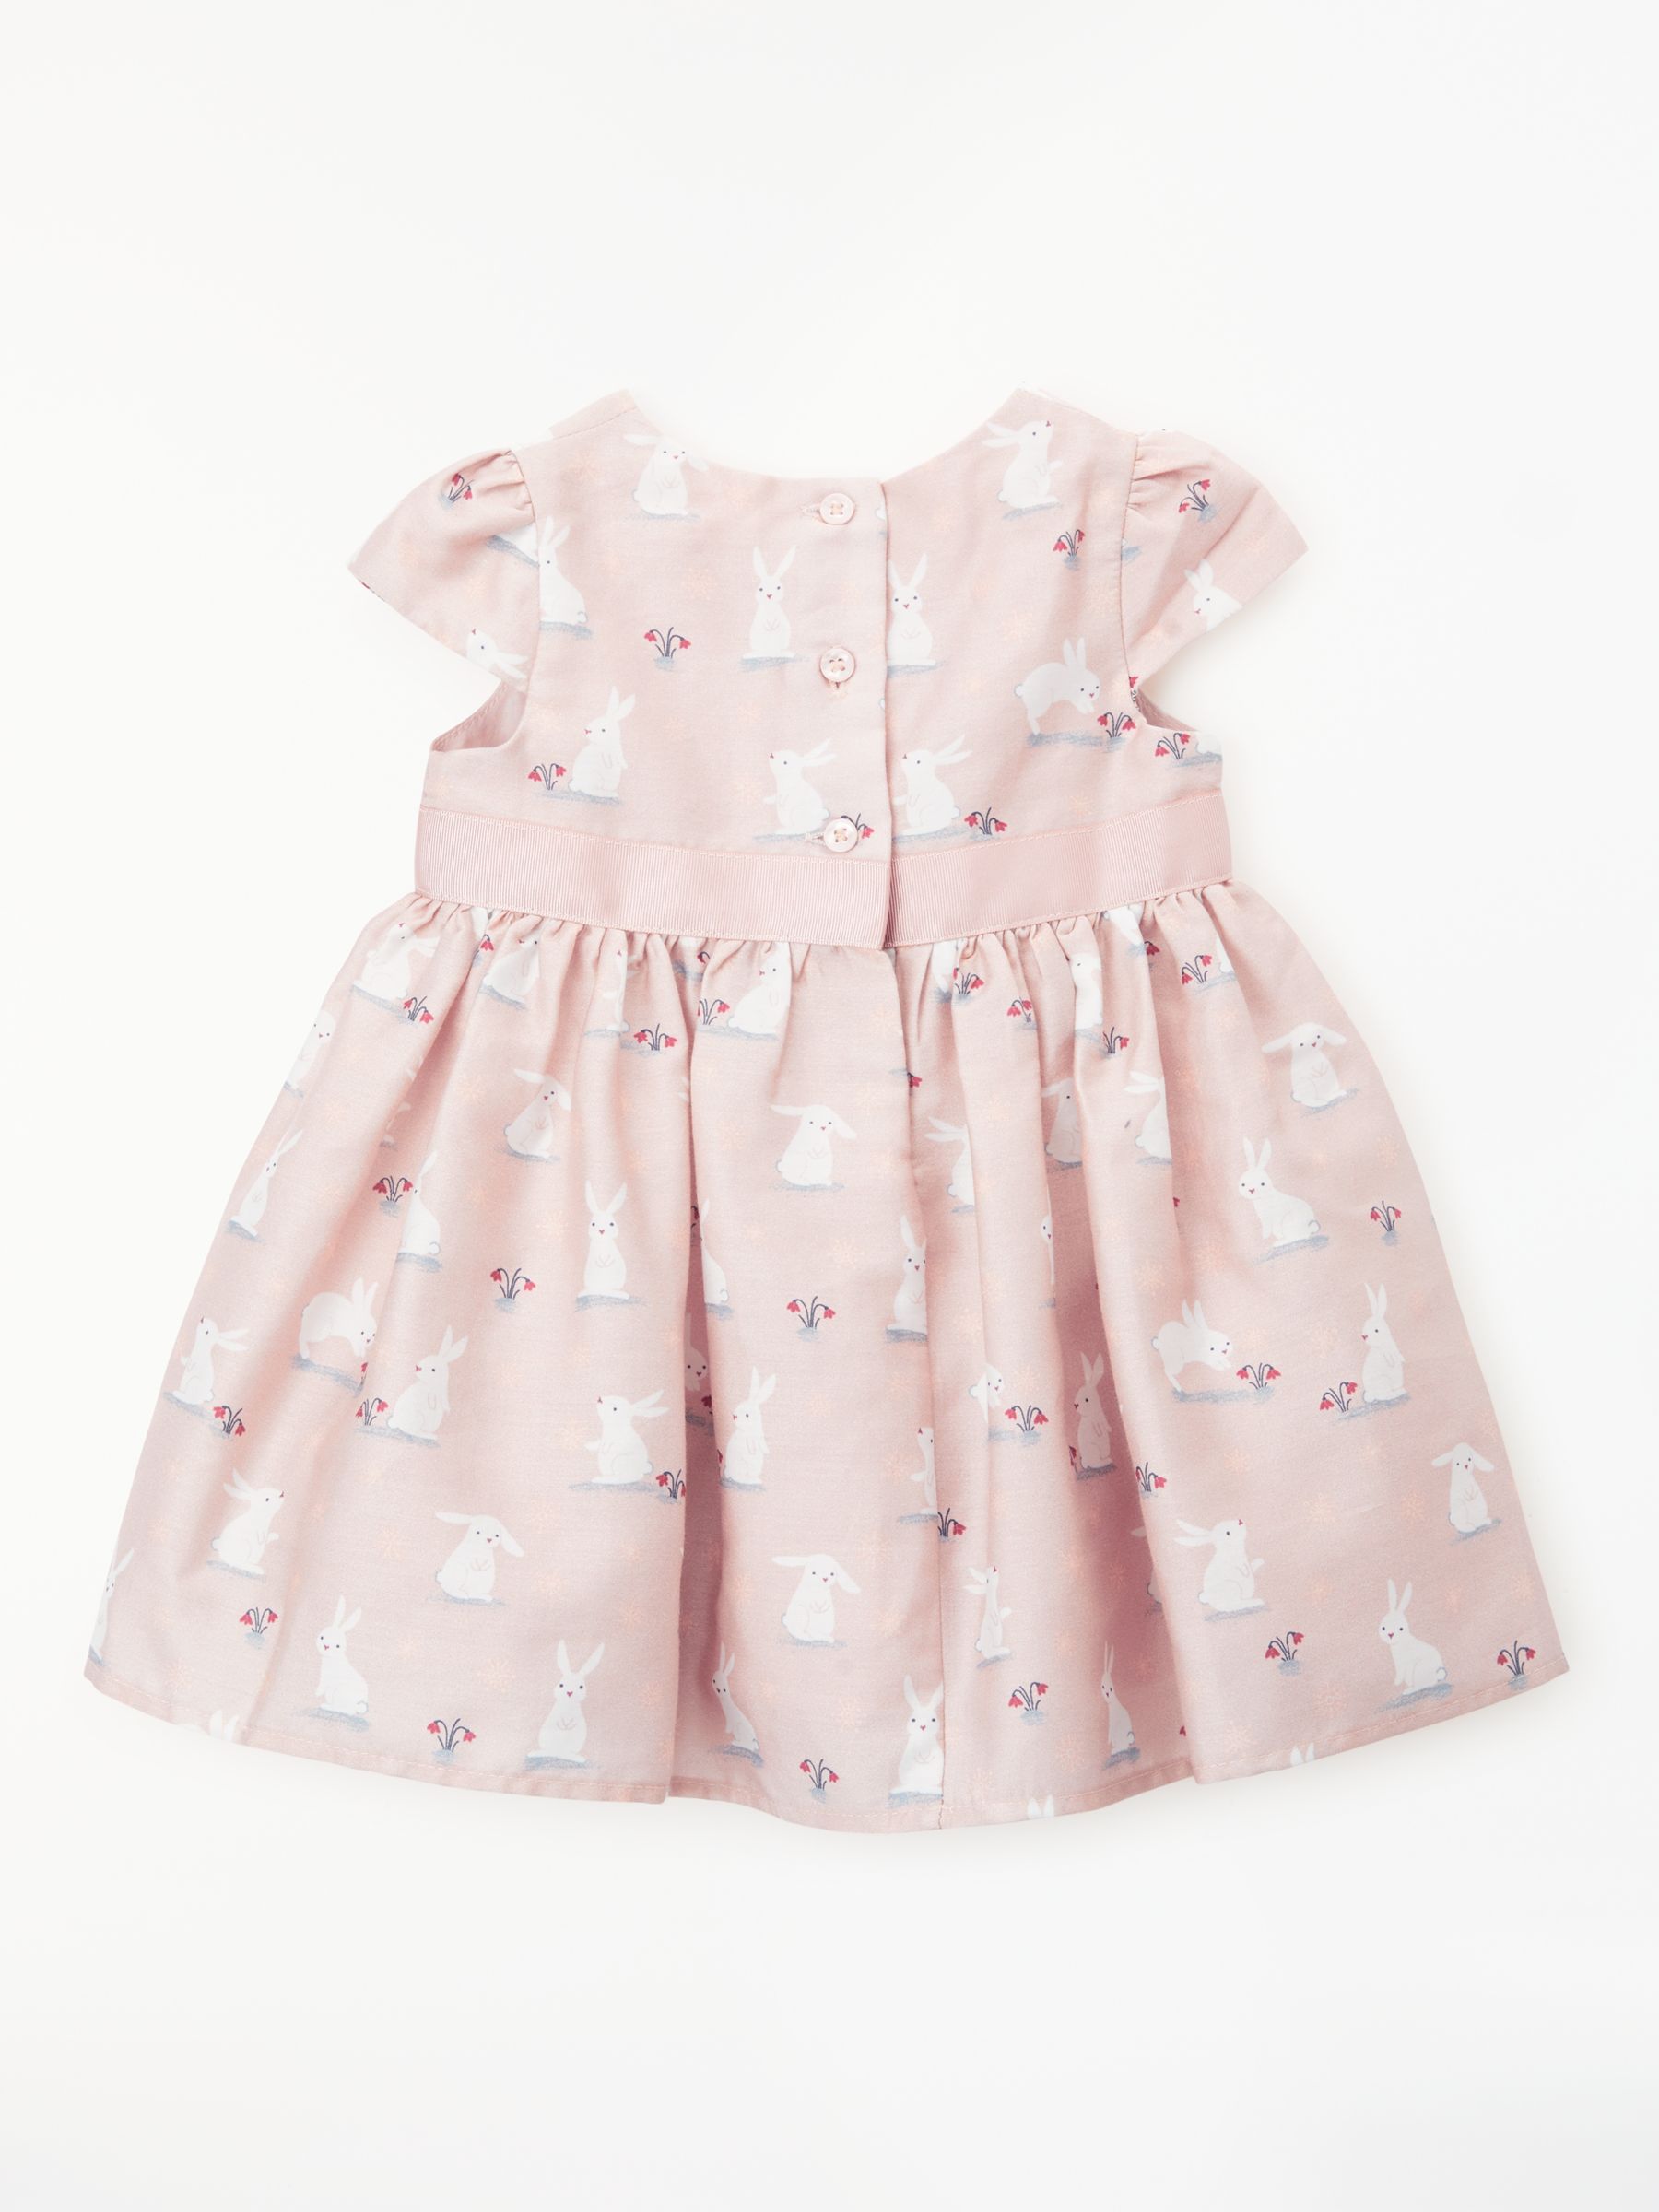 John Lewis & Partners Baby Party Bunny Dress, Pink, 12-18 months